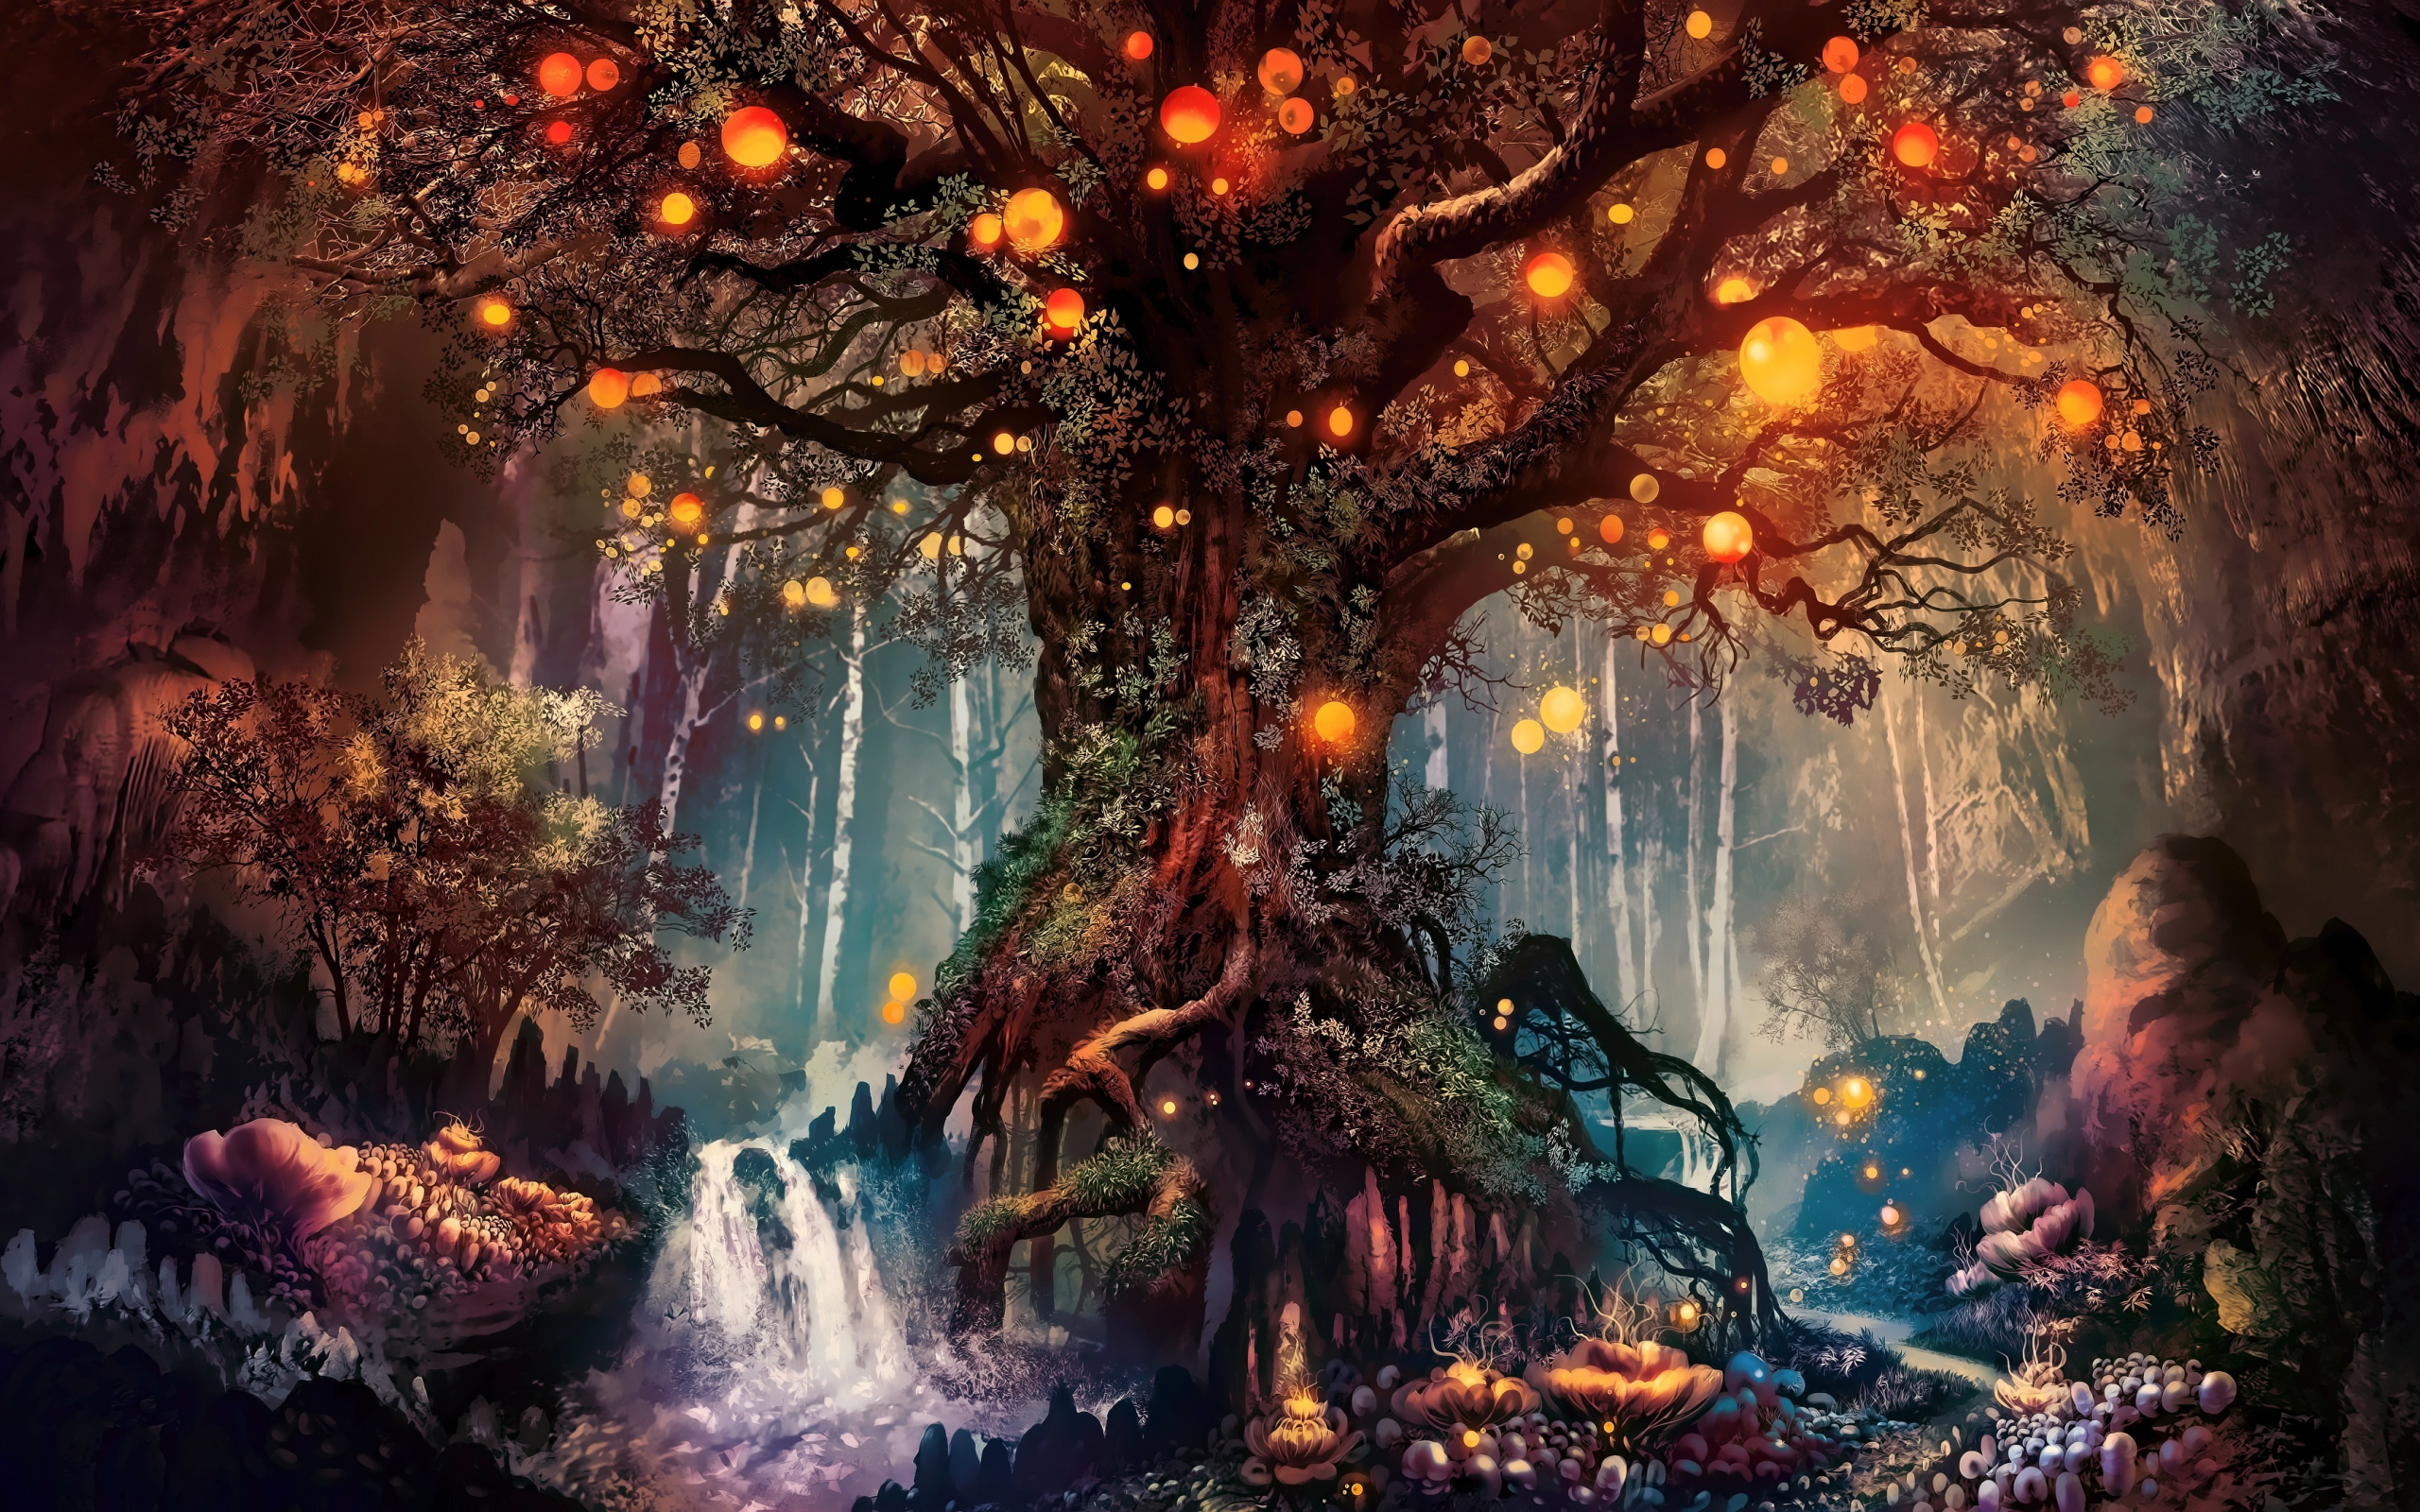 Download wallpaper 2560x1600 old tree, fantasy, art, dual wide 16:10  2560x1600 hd background, 1193